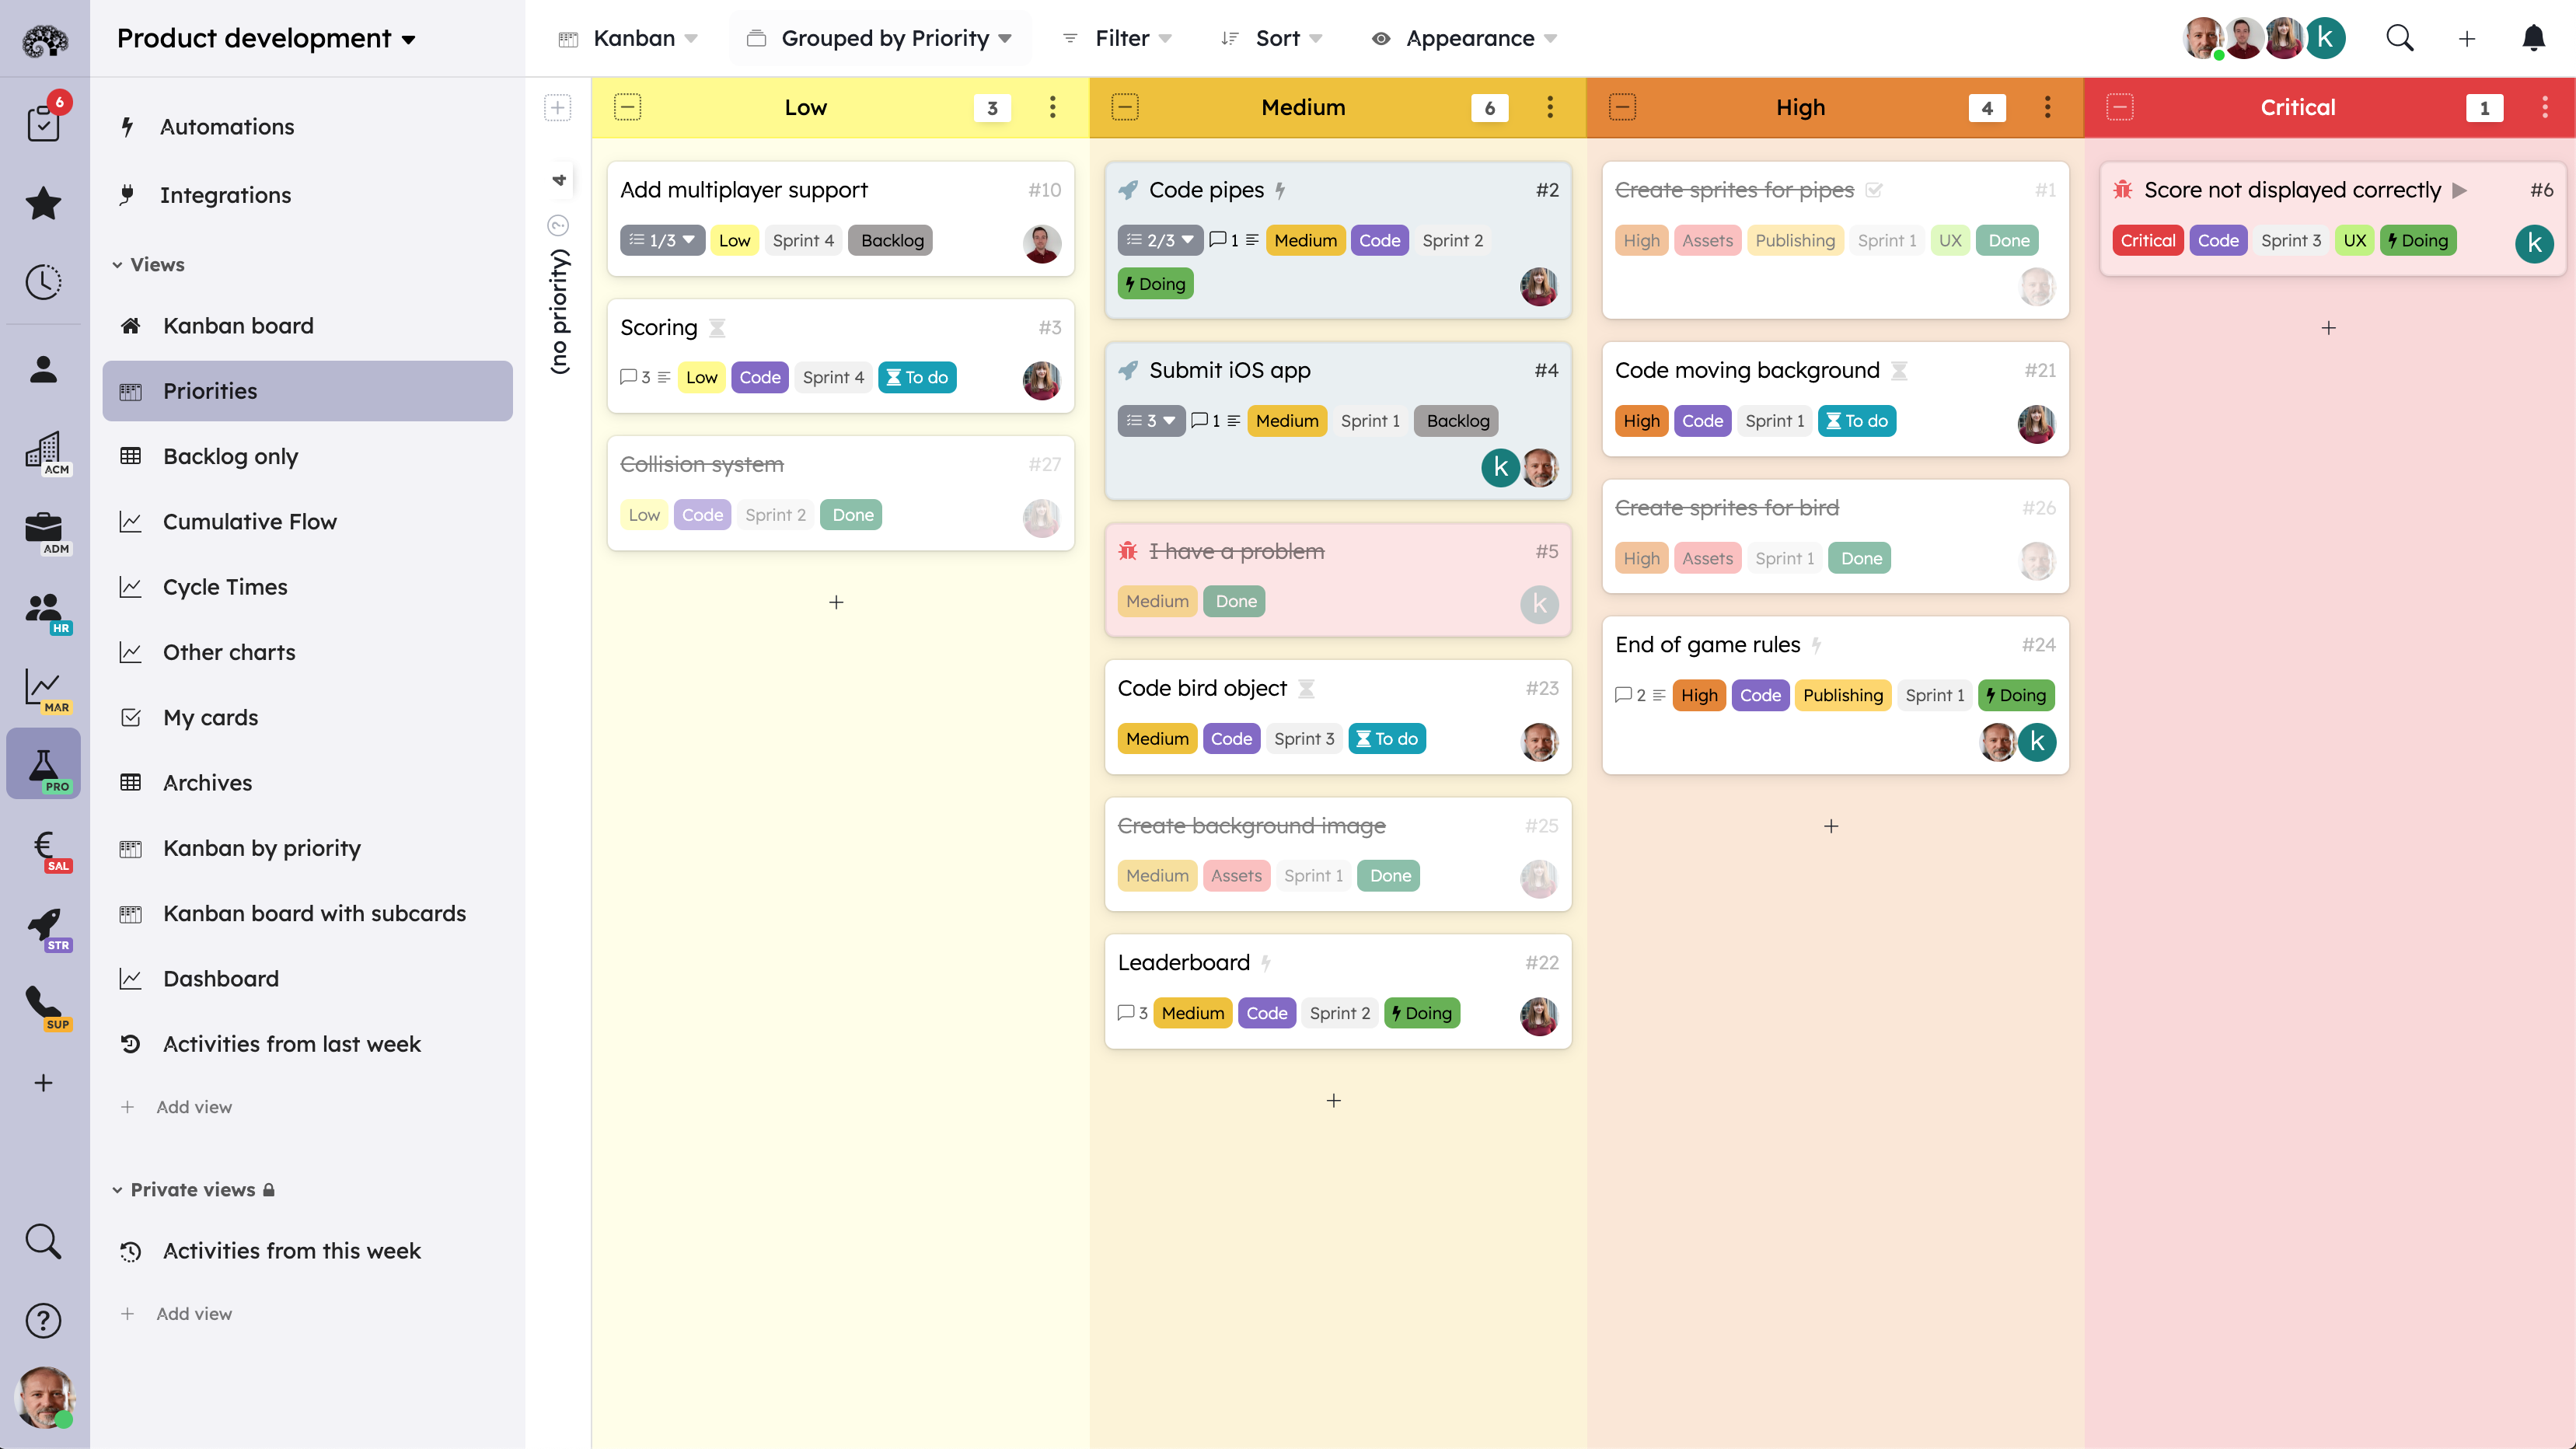 Kanban view: grouped by priority